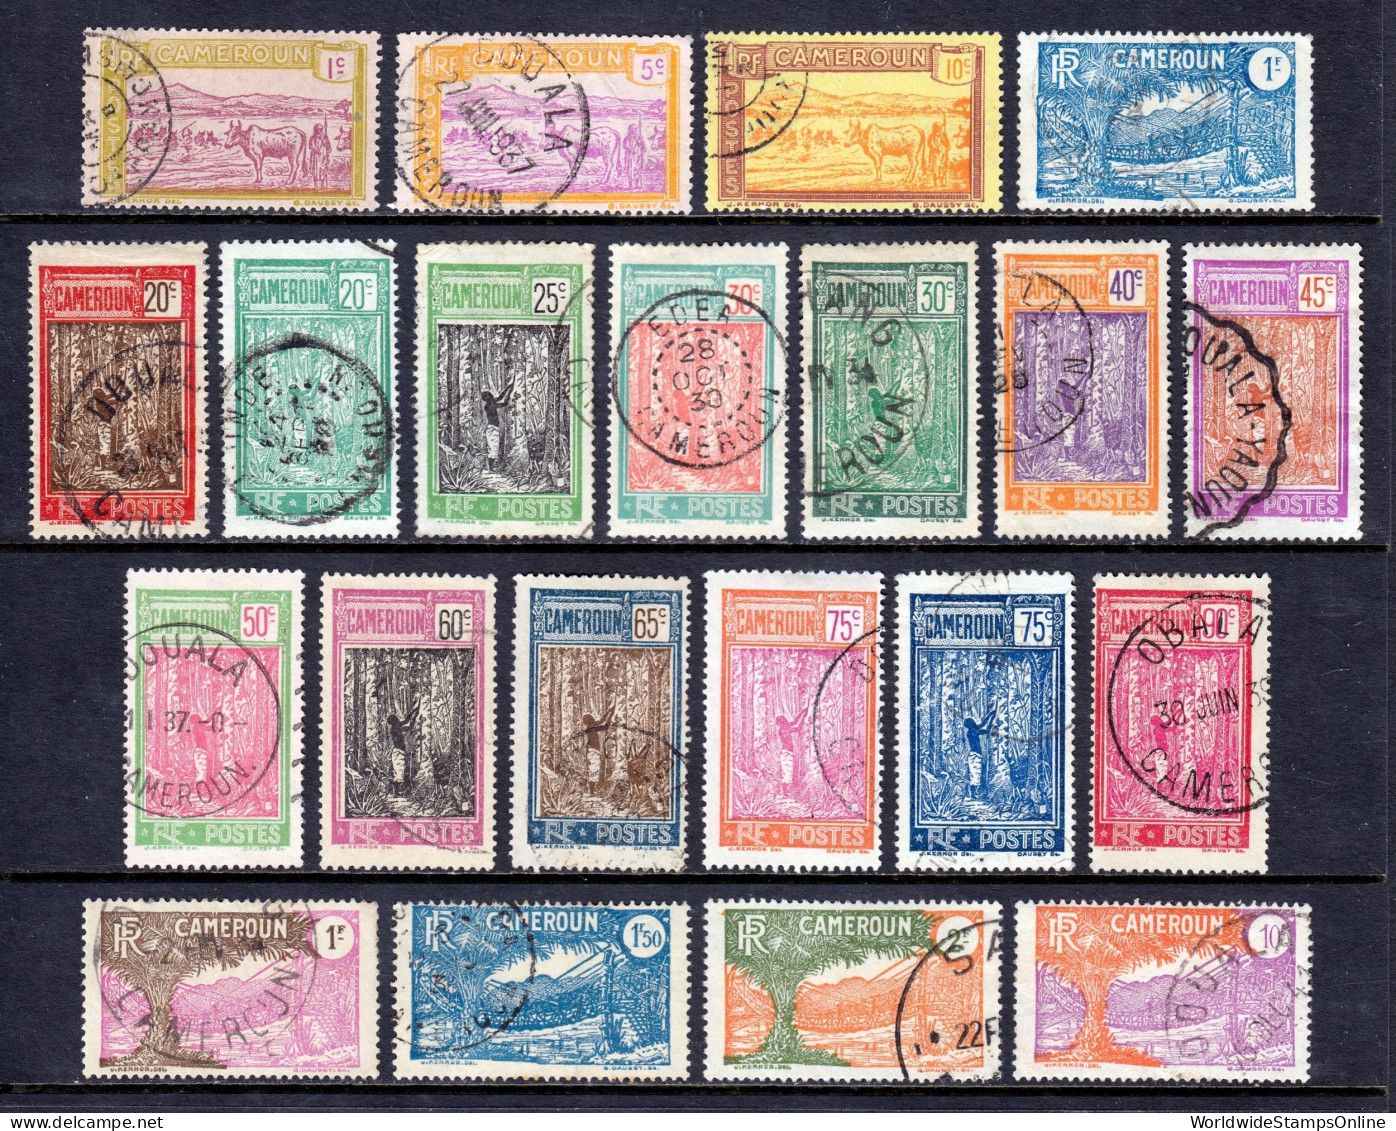 Cameroun - Scott #170//210 - Used - Short Set, Expect A Few Faults - SCV $21 - Used Stamps